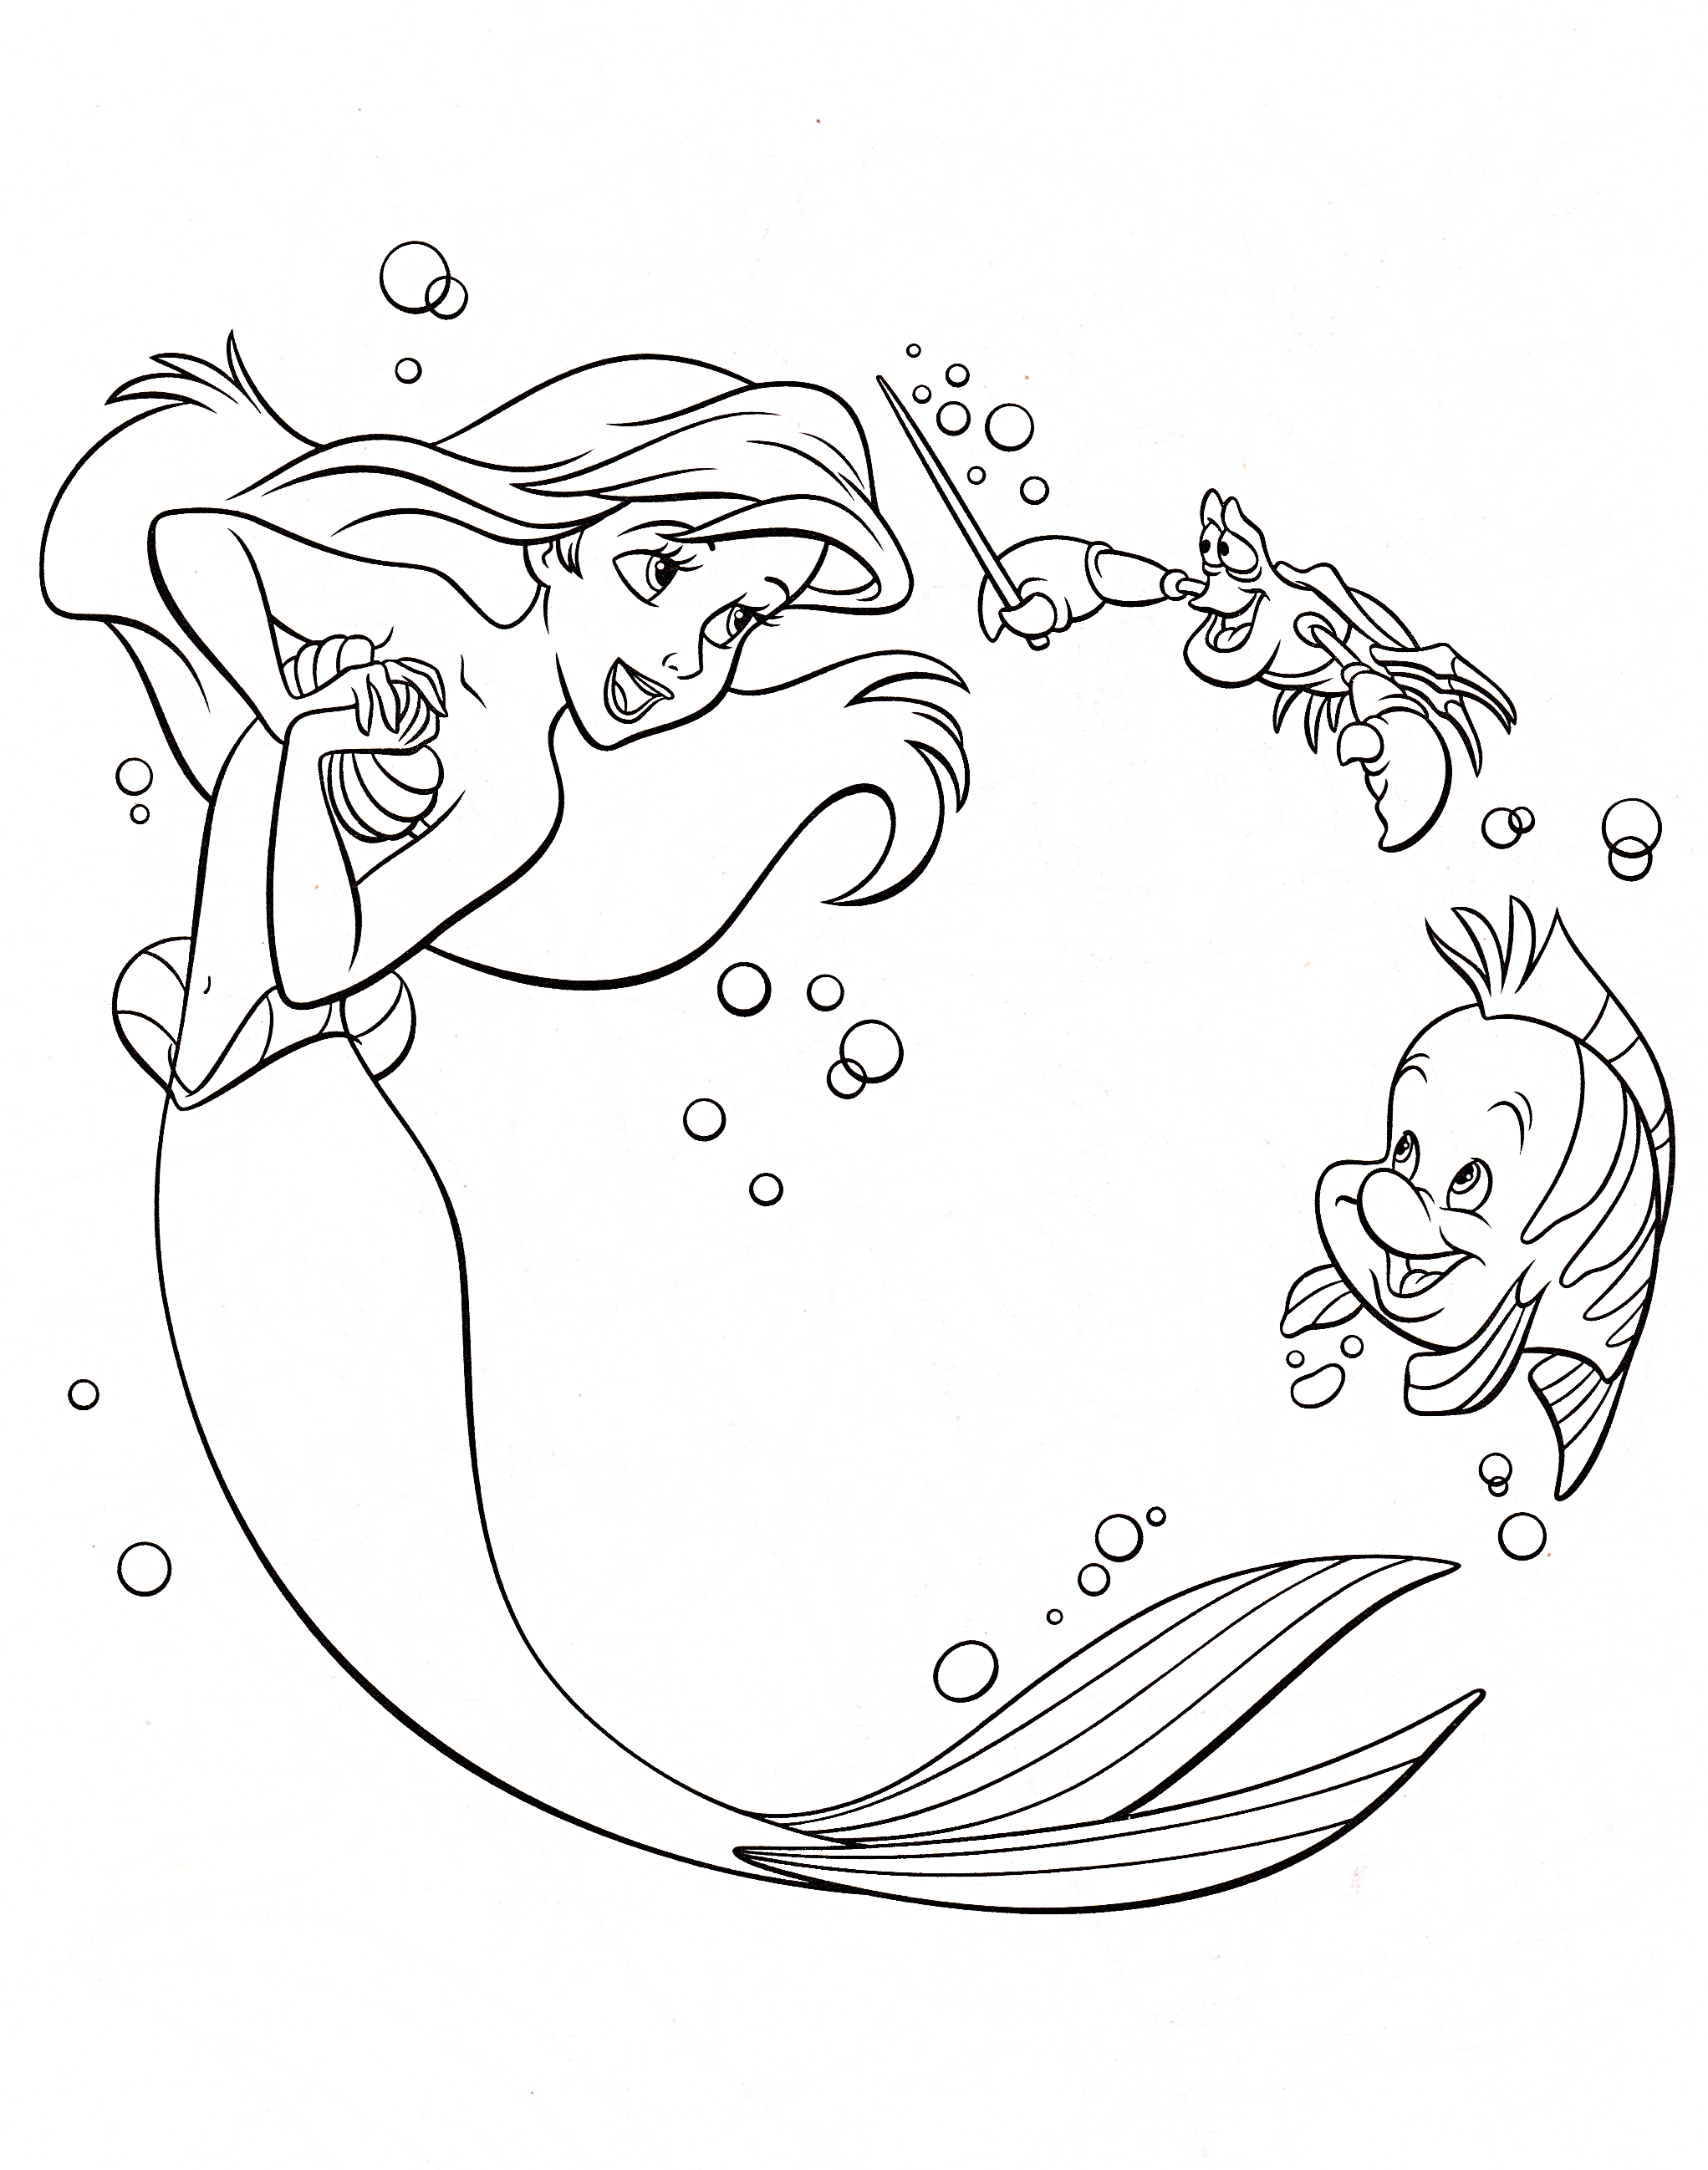 Flounder Coloring Pages From The Little Mermaid at GetColorings.com ...